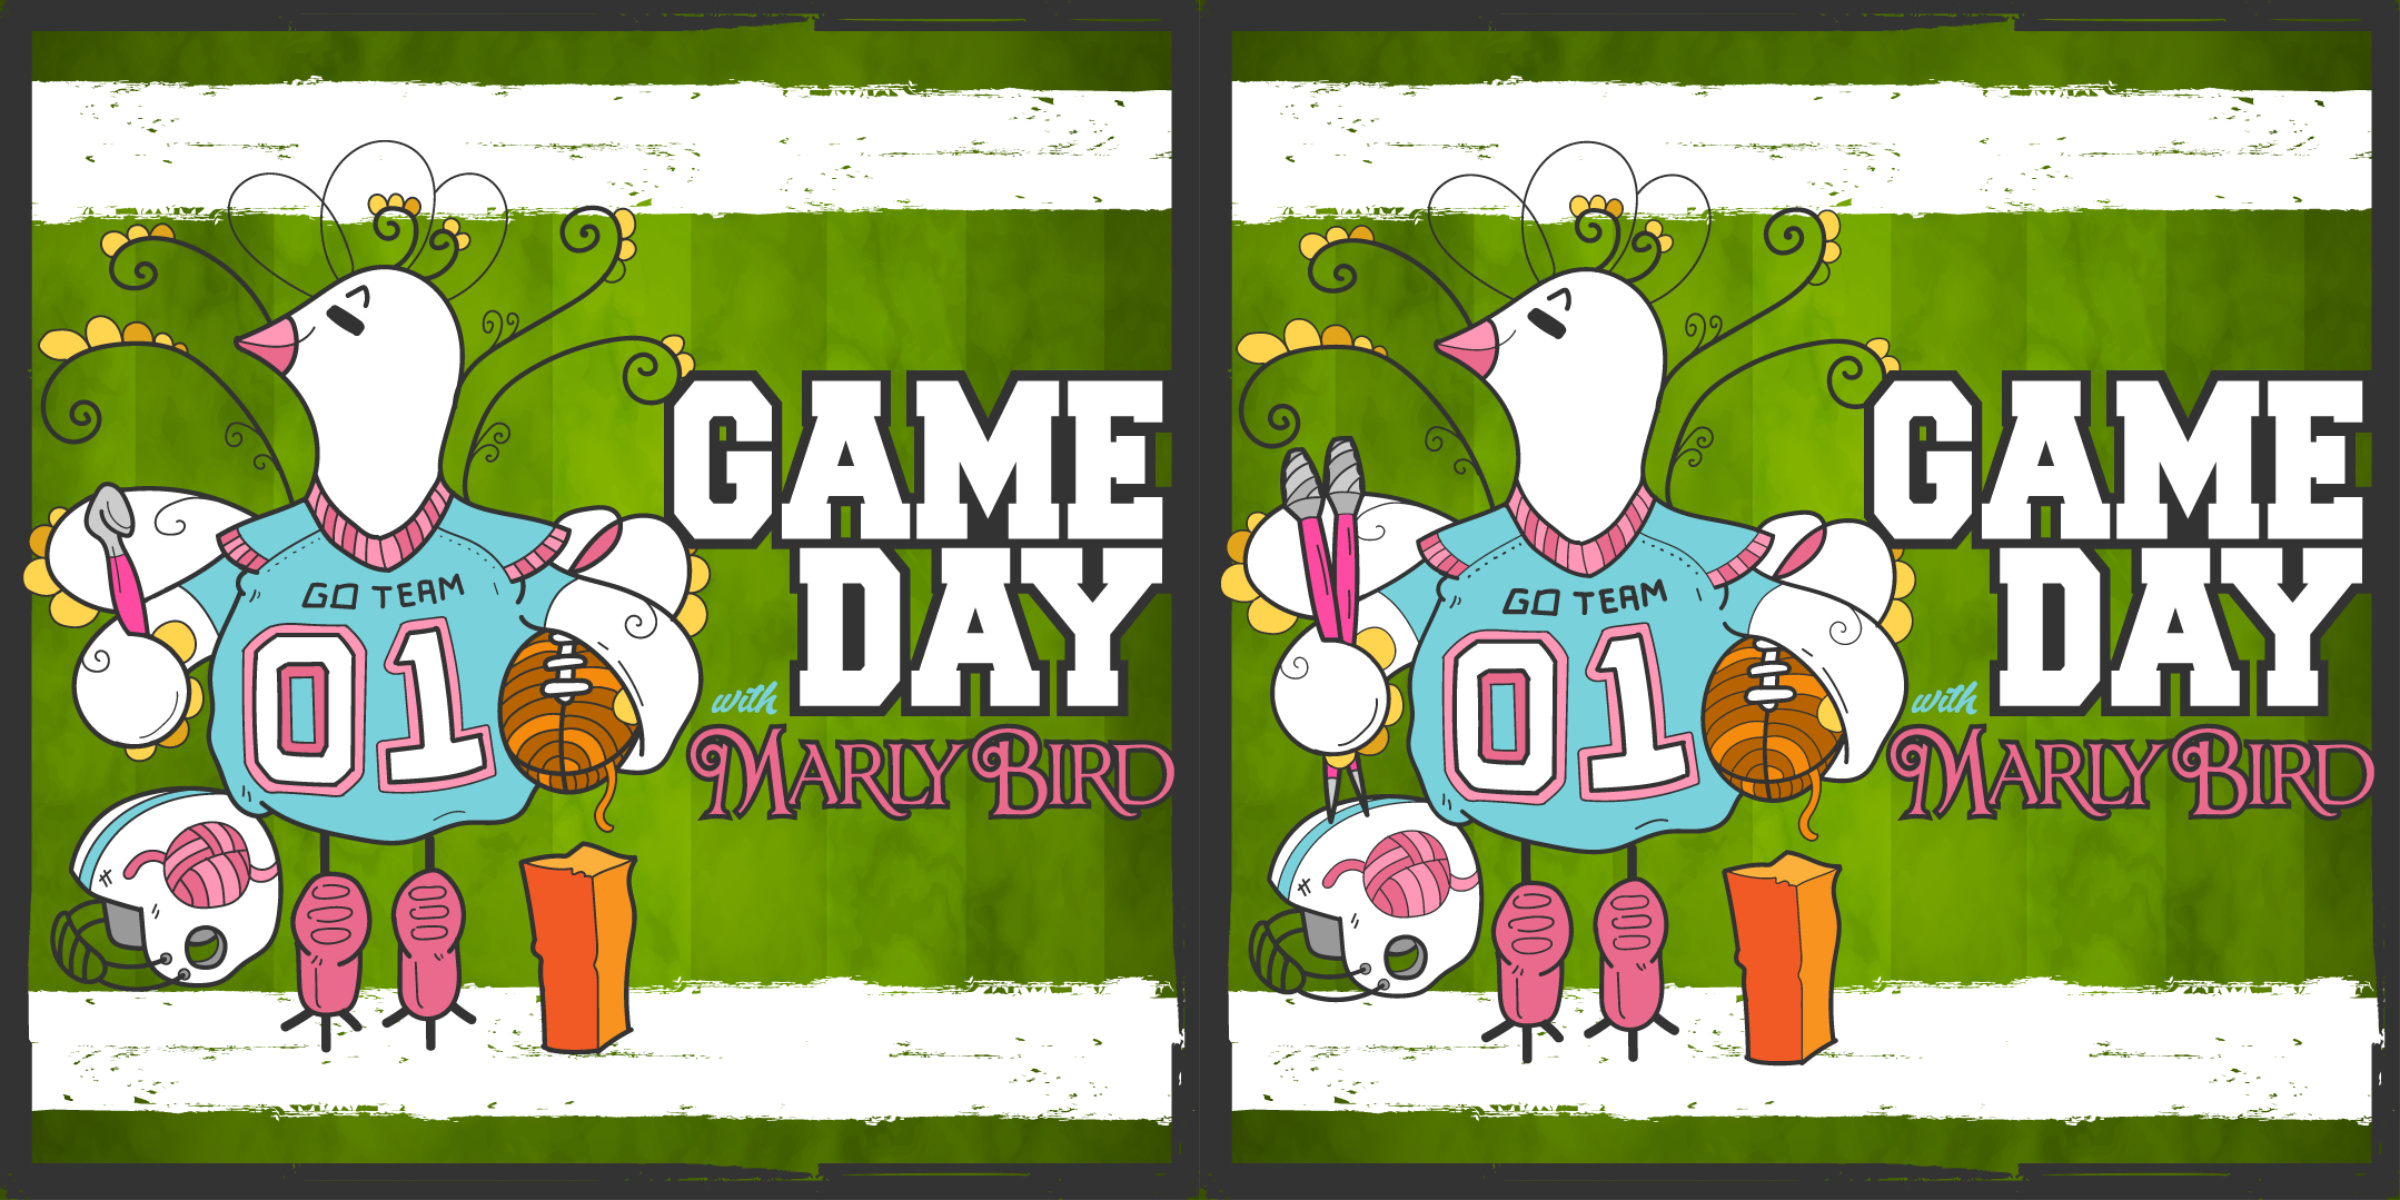 Illustration of a cartoon bird in a sports jersey labeled "01" and "go team," celebrating "Game Day Mystery Make Along 2021" with a football and megaphone, set against a stylized floral and striped background. -Marly Bird